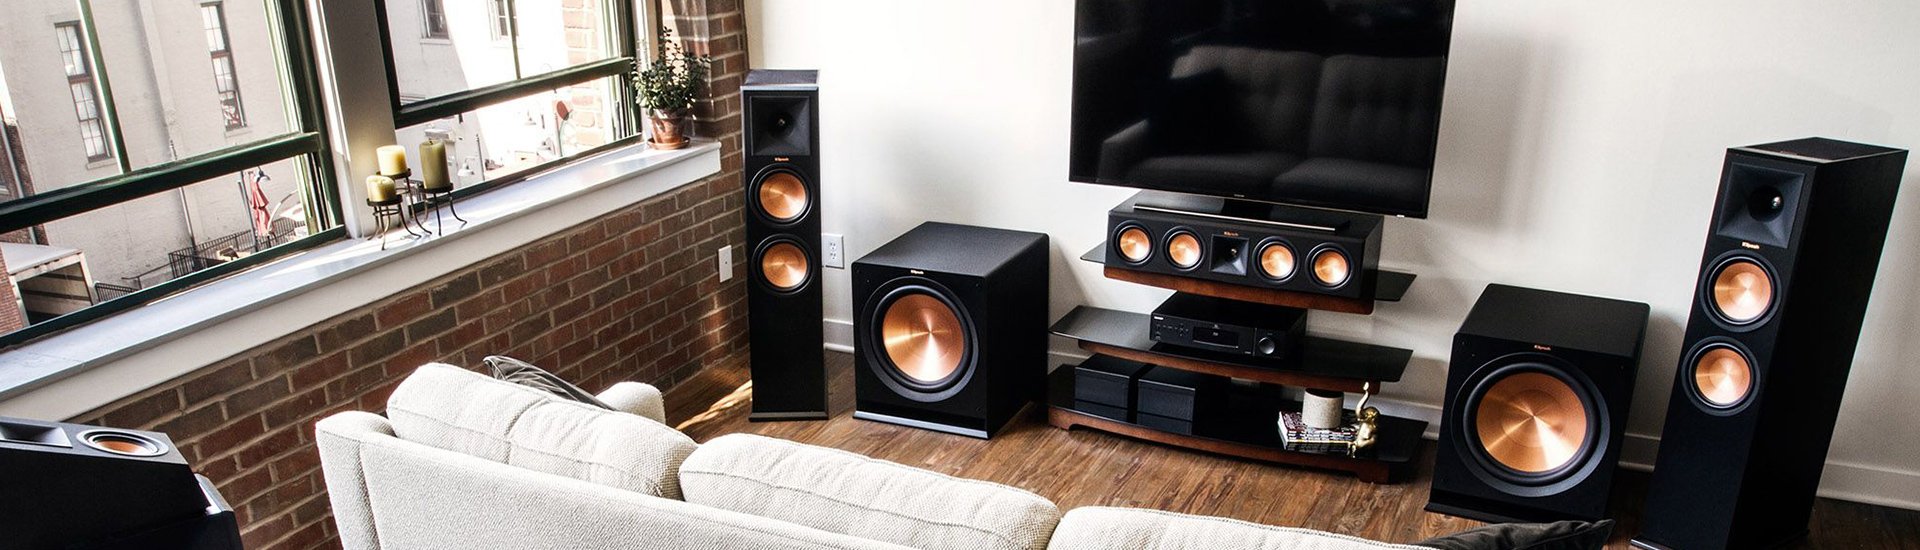 How to Choose a Home Theater System: Buying Guide